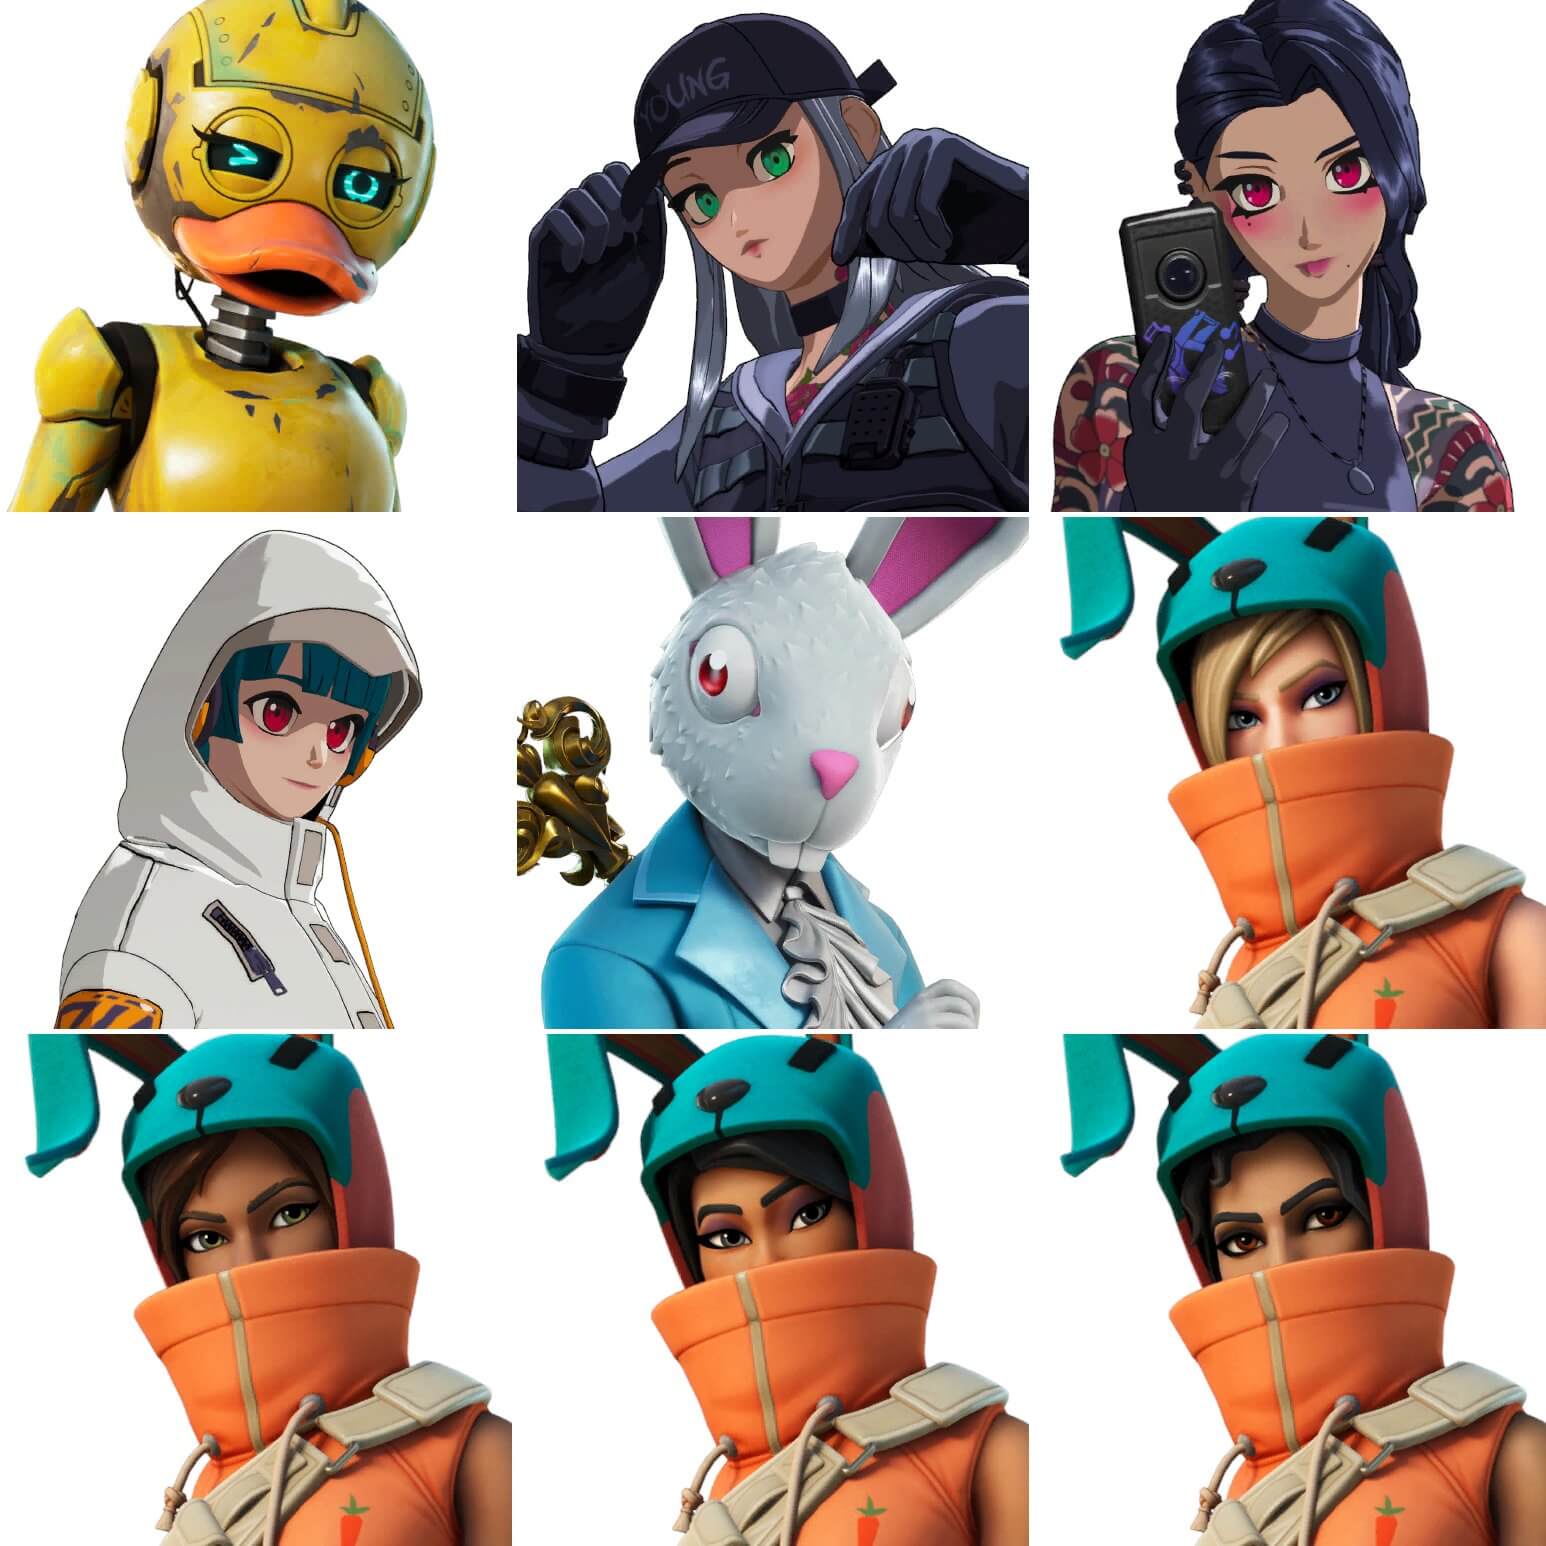 Best Fortnite Anime Skin List - Which one should you choose?